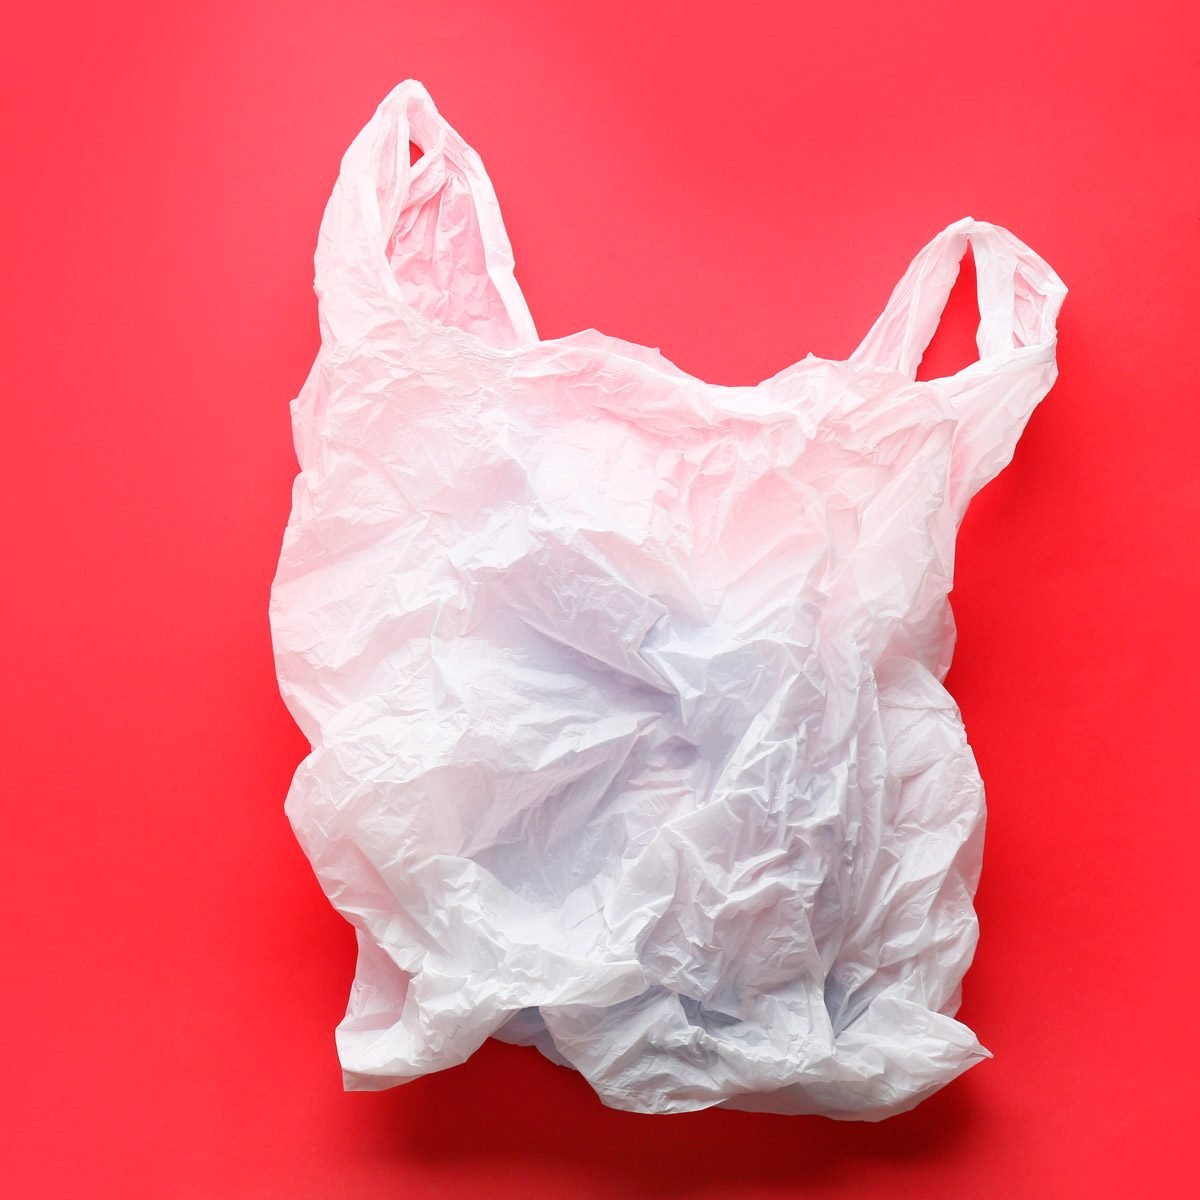 The Best Ways to Store Plastic Bags